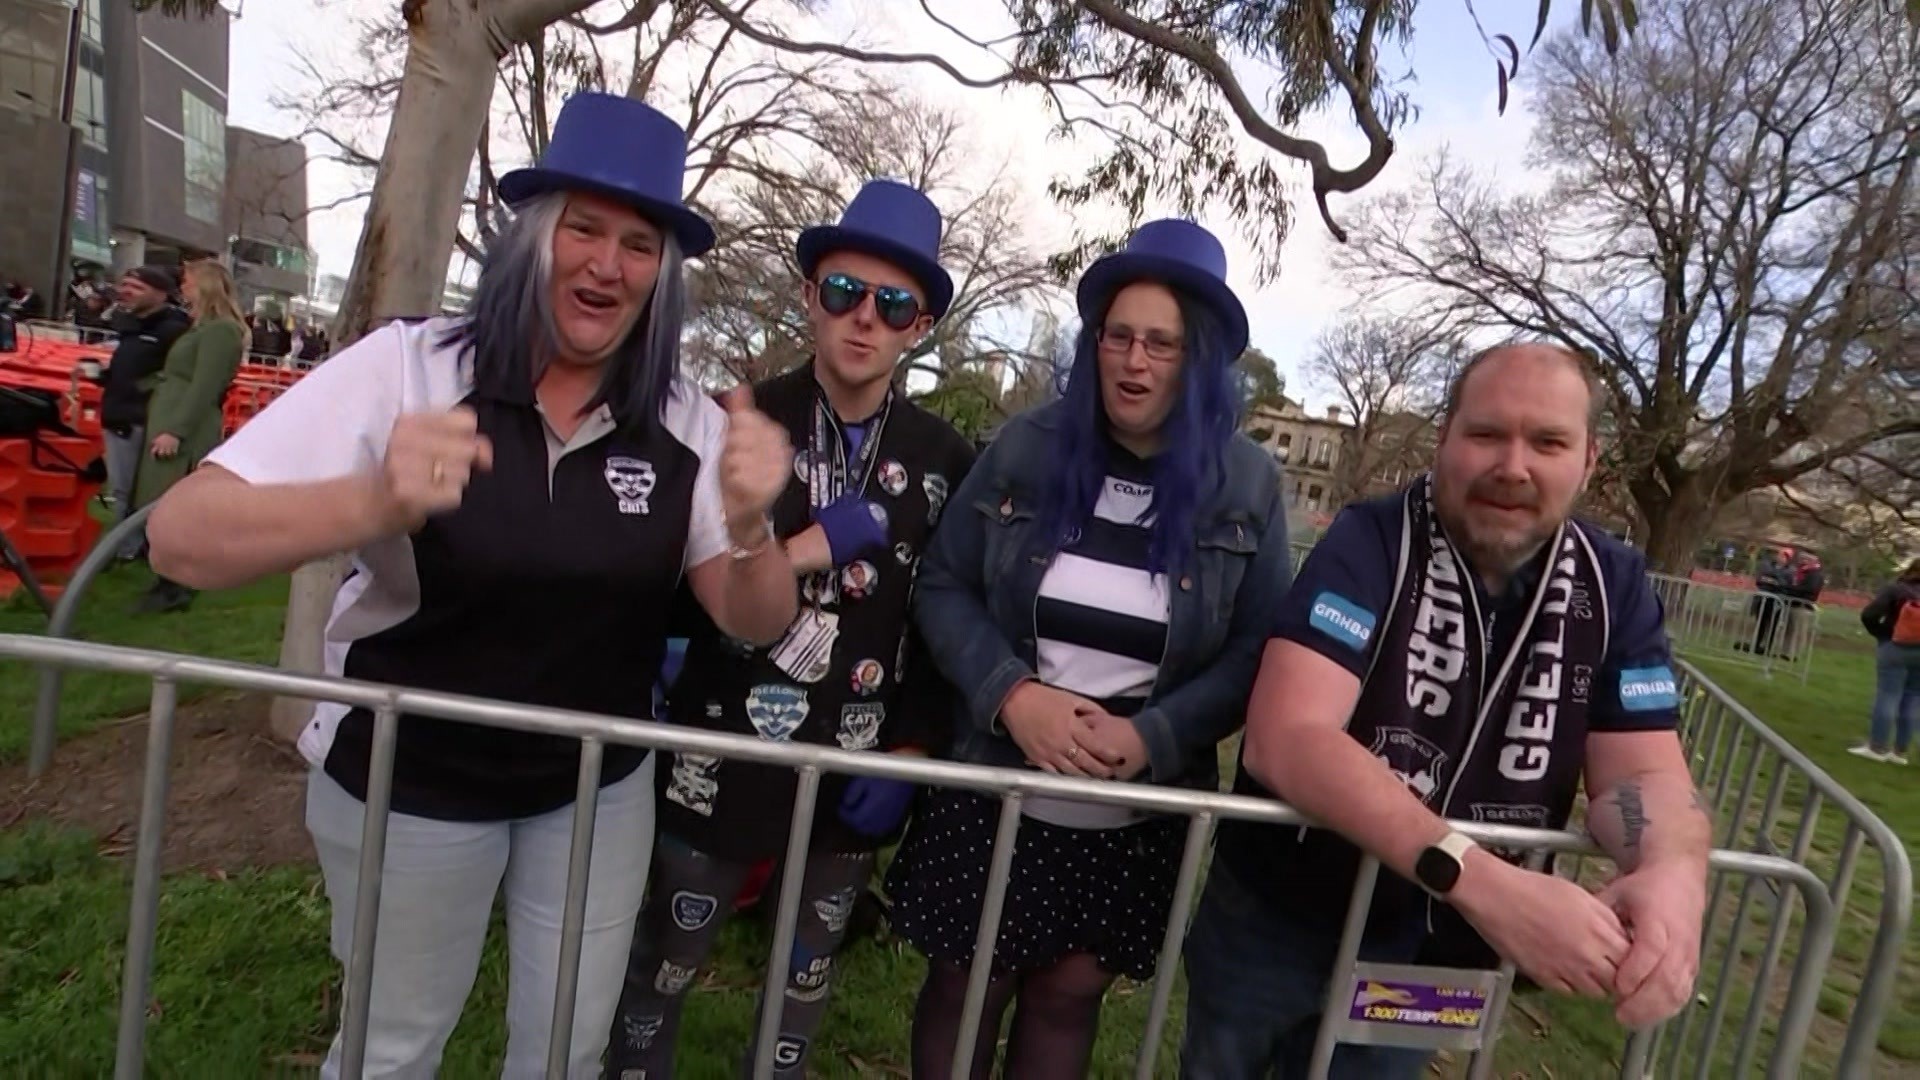 Four Geelong supporters, dressed in blue and white, pump their fists.